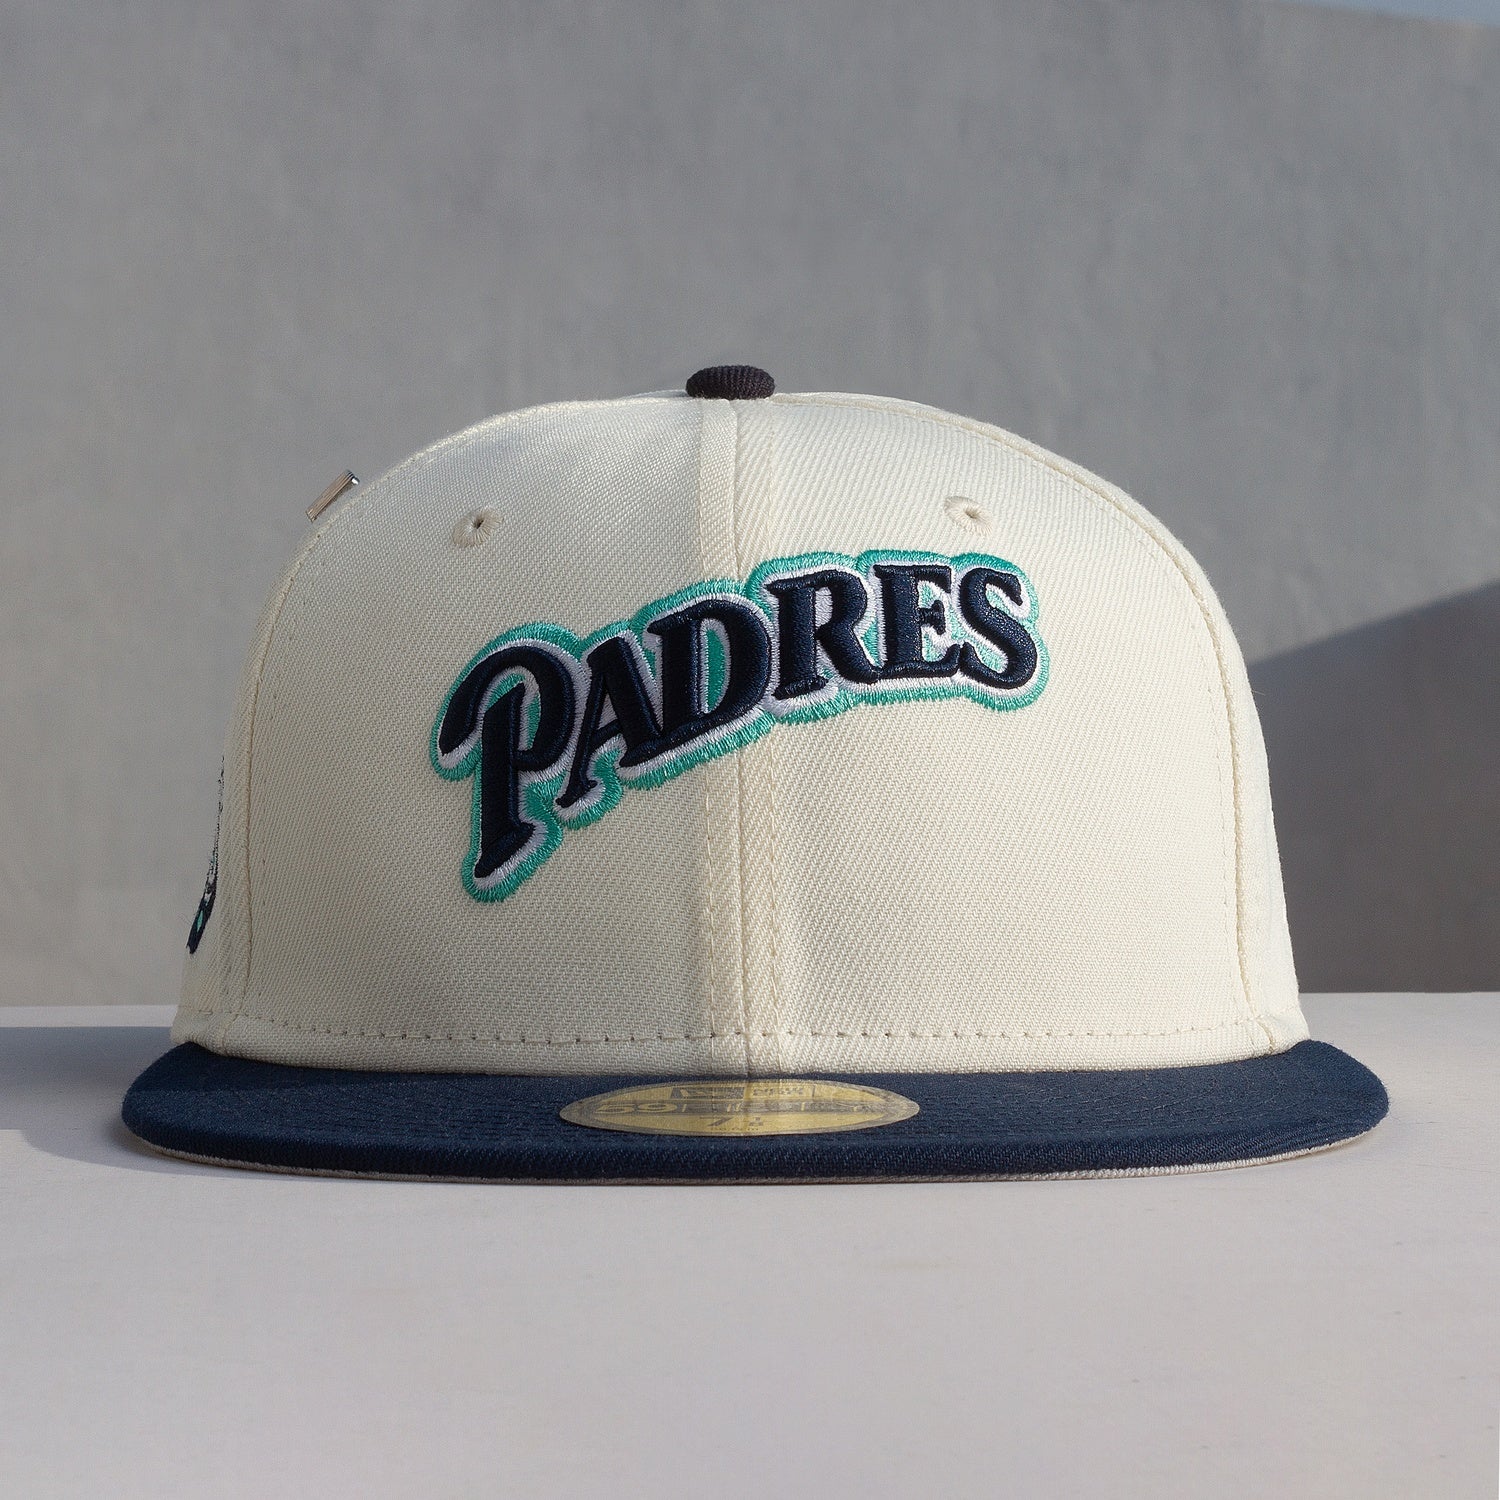 New Era 59FIFTY San Diego Padres Pride Fitted Hat Black